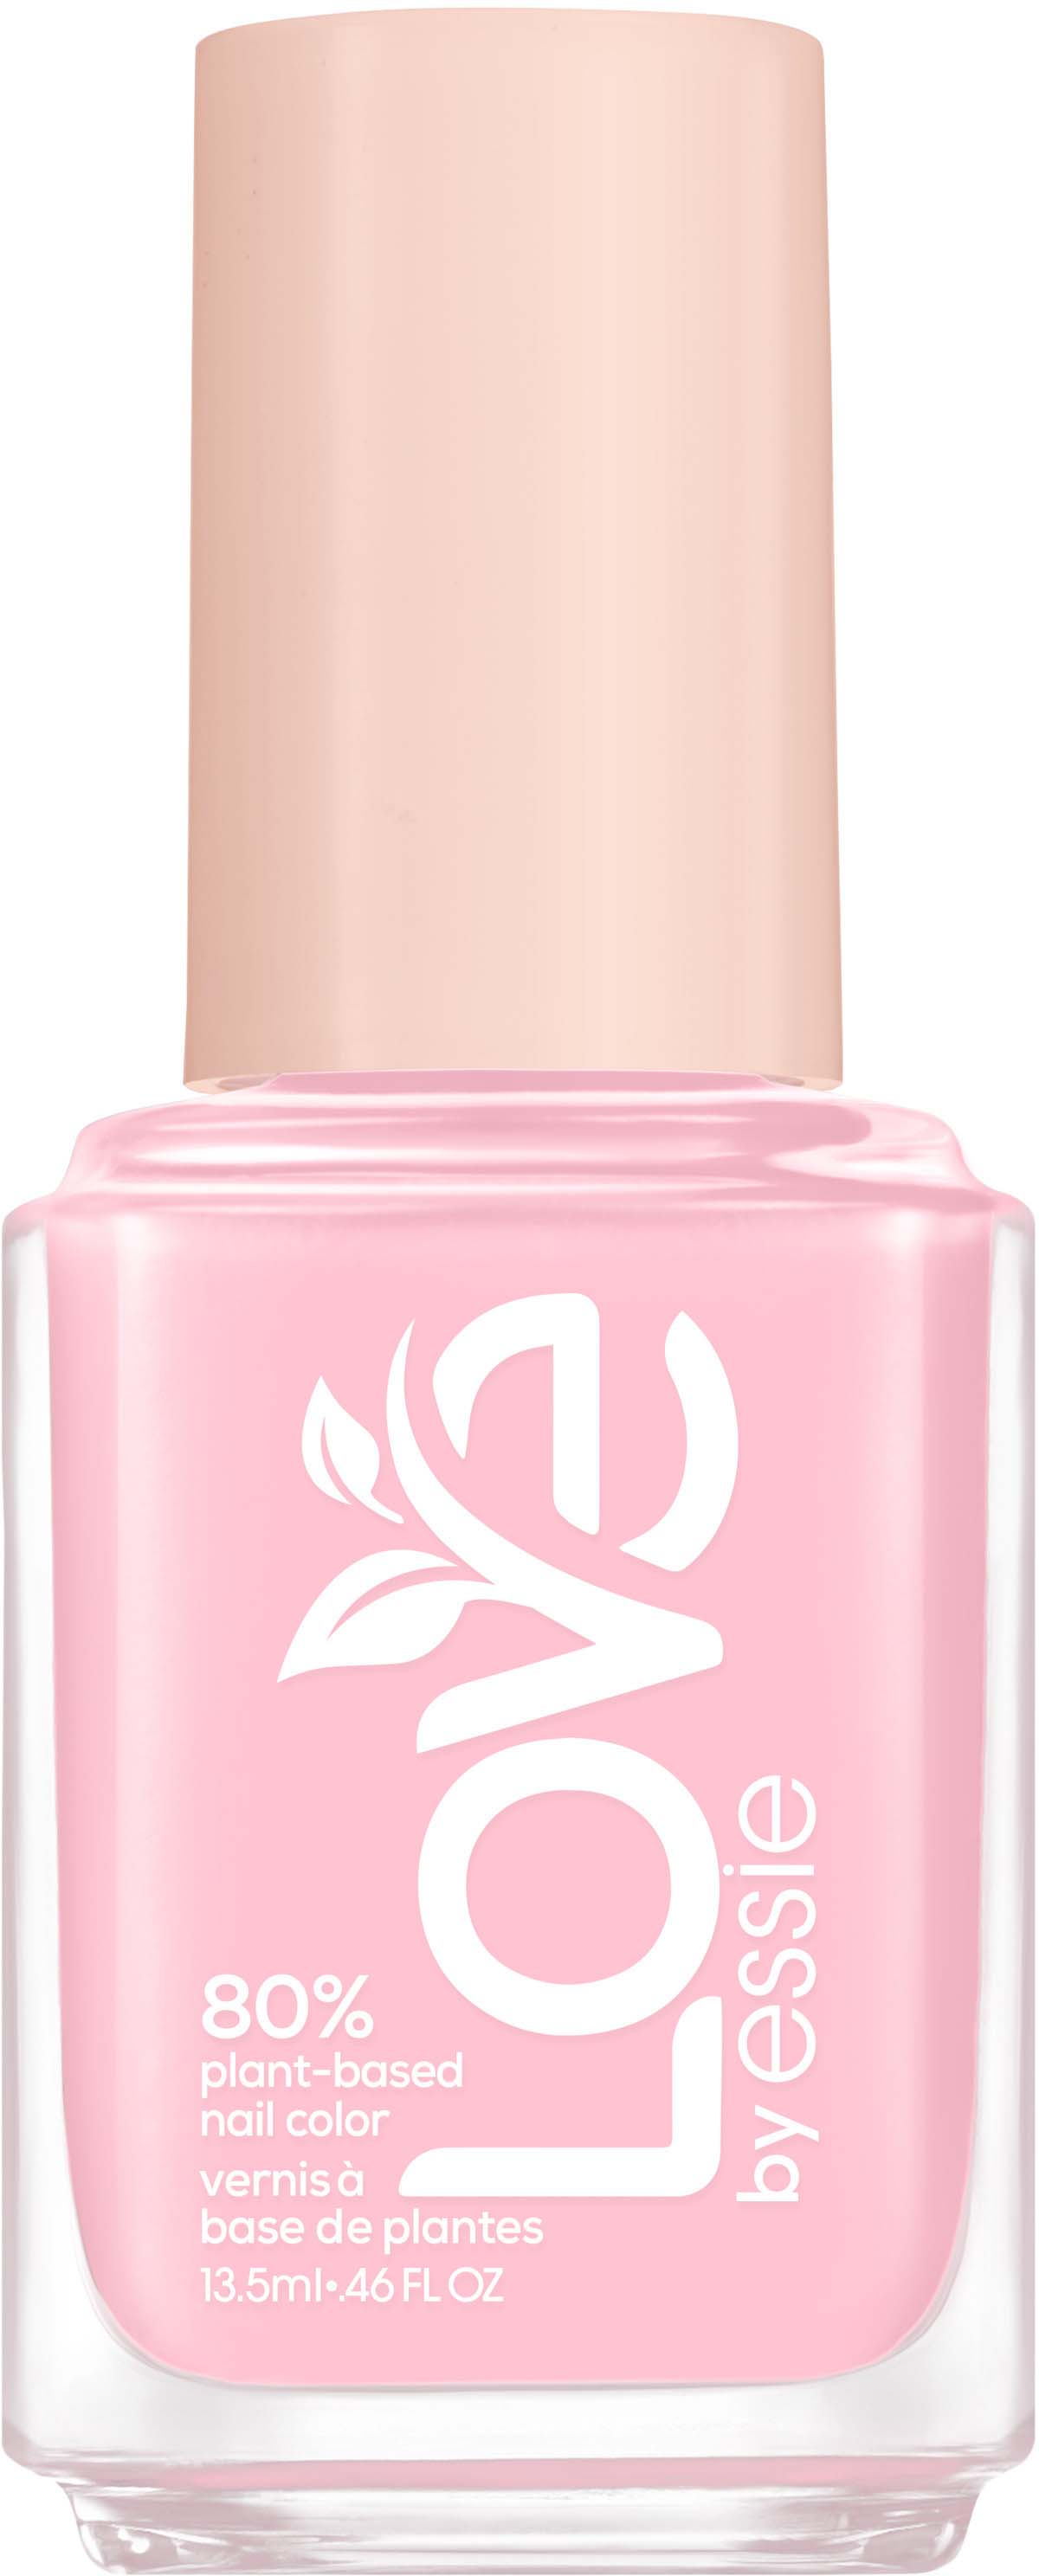 Move Plant-based LOVE The Nail Make by 80% Essie Essie 130 Color